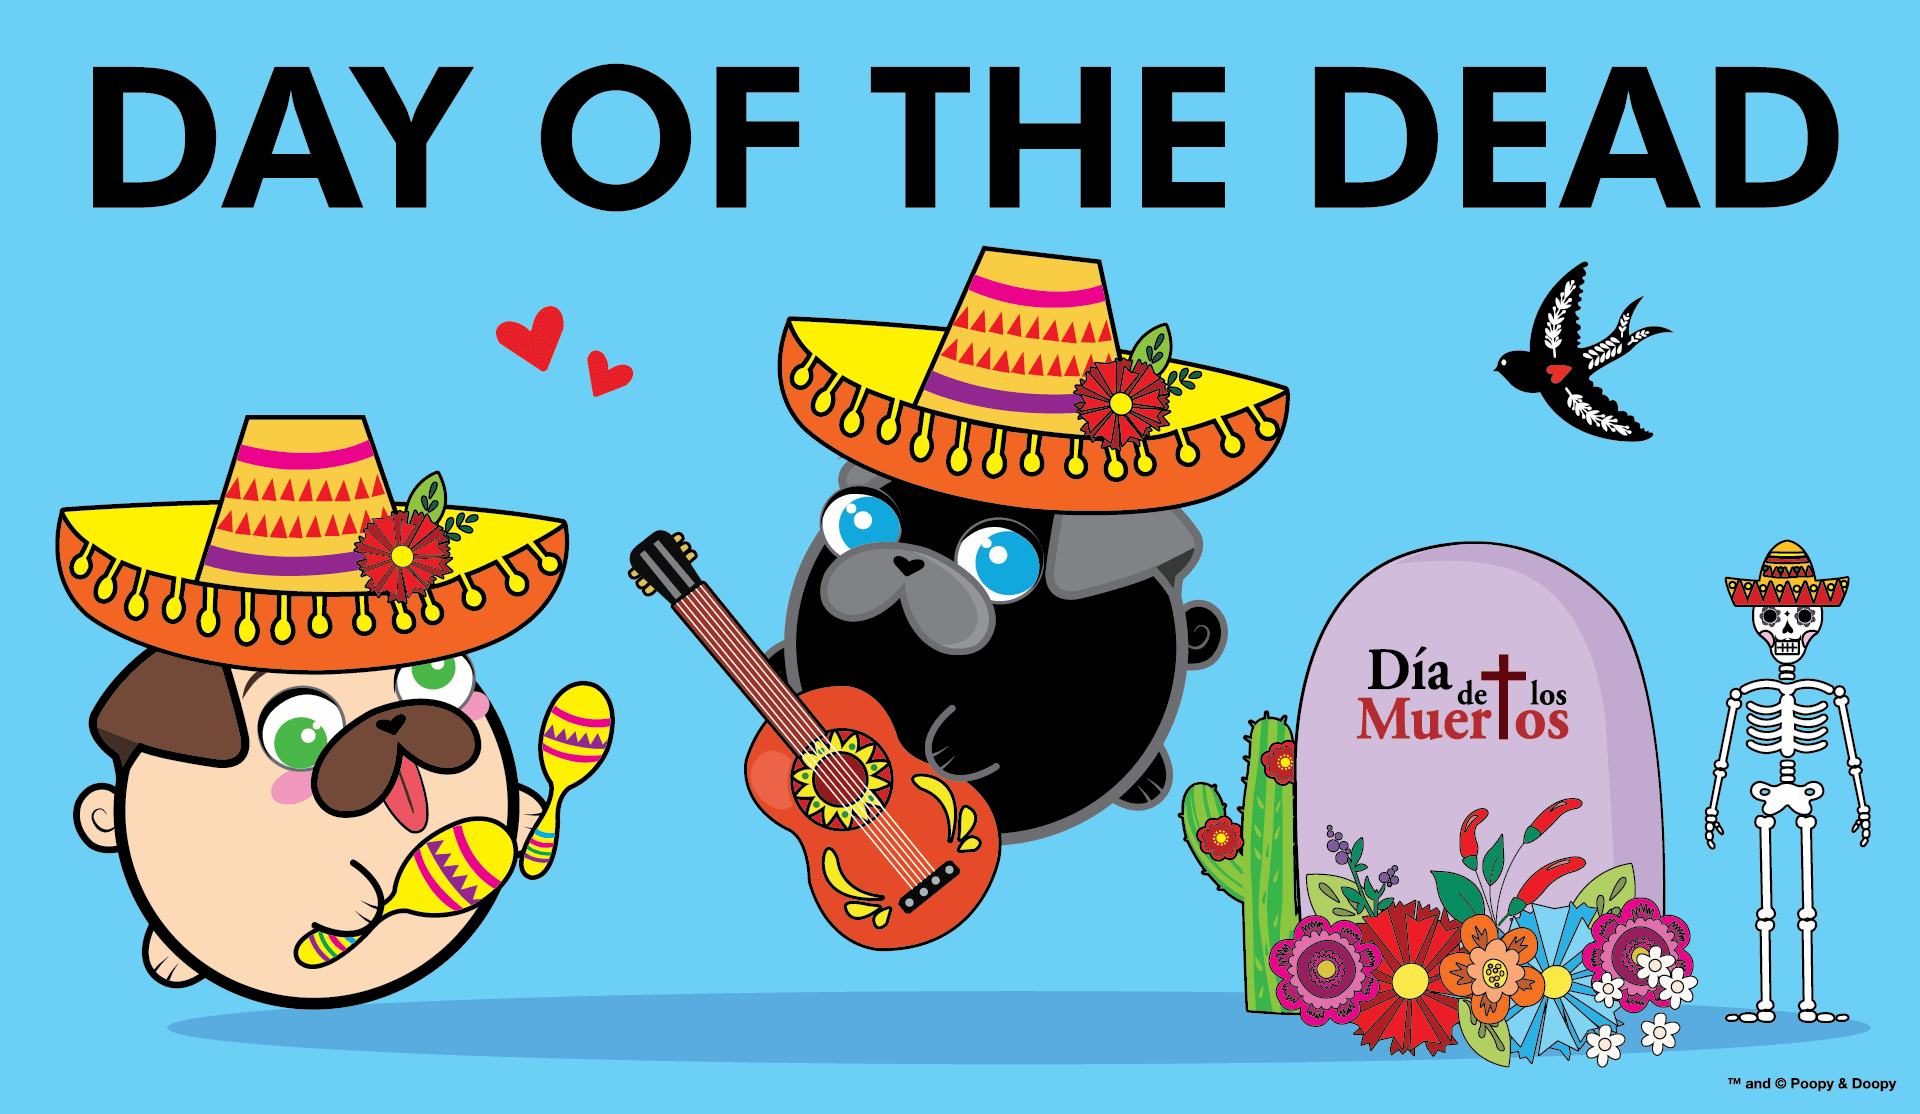 Poopy and Doopy - Day of the Dead